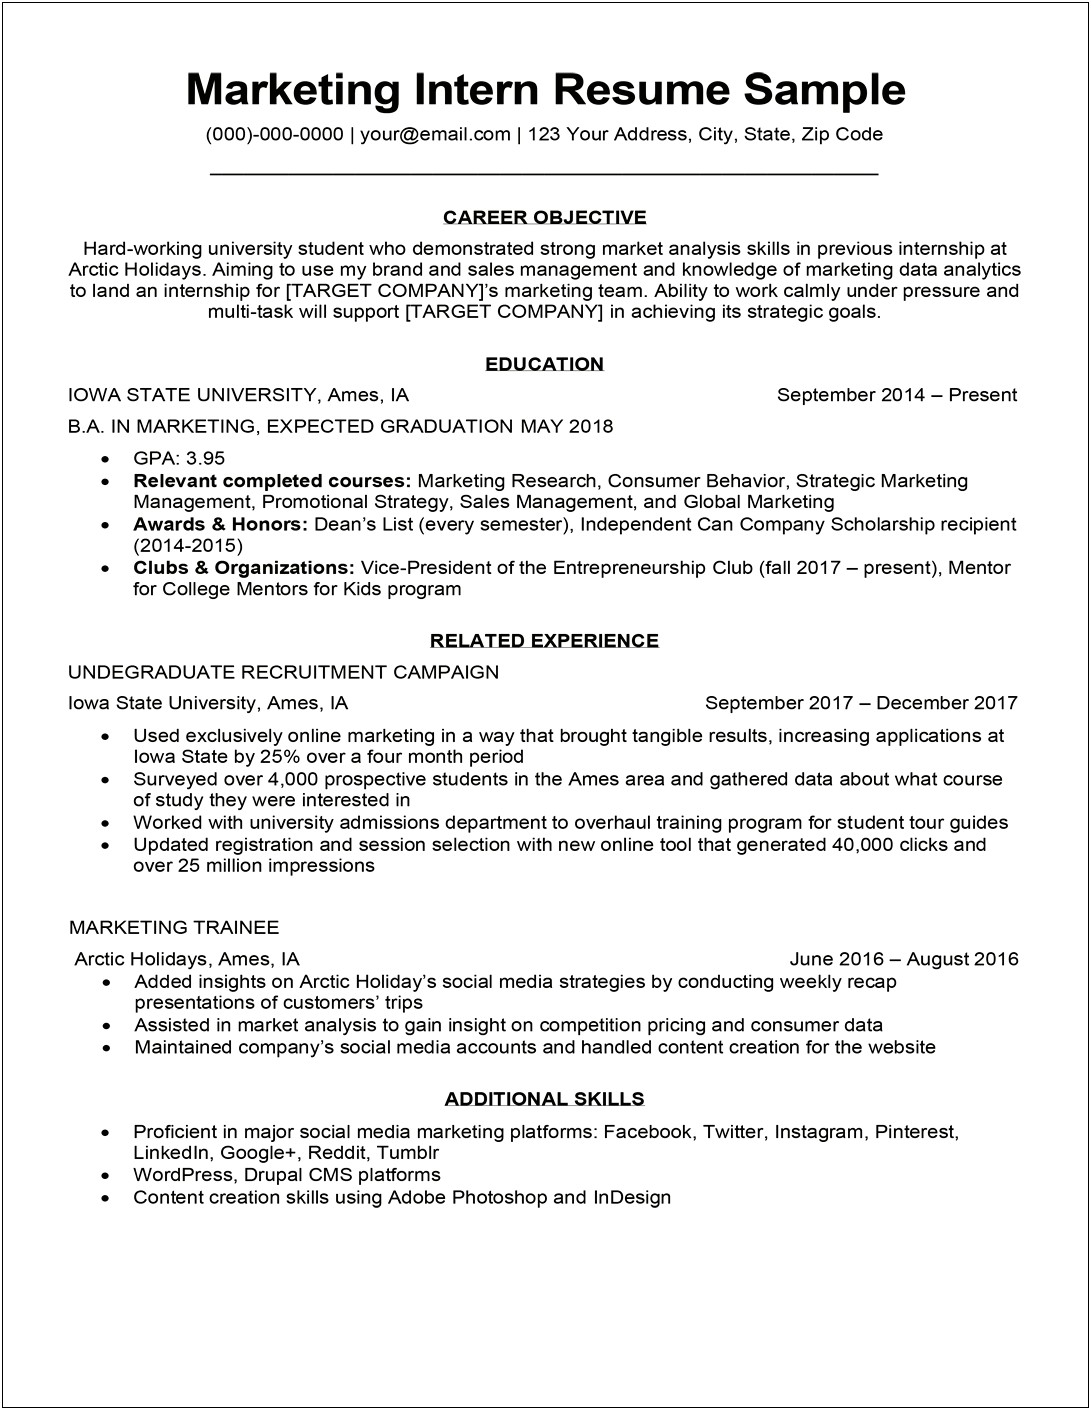 Are Objectives Still Used On Resumes 2016